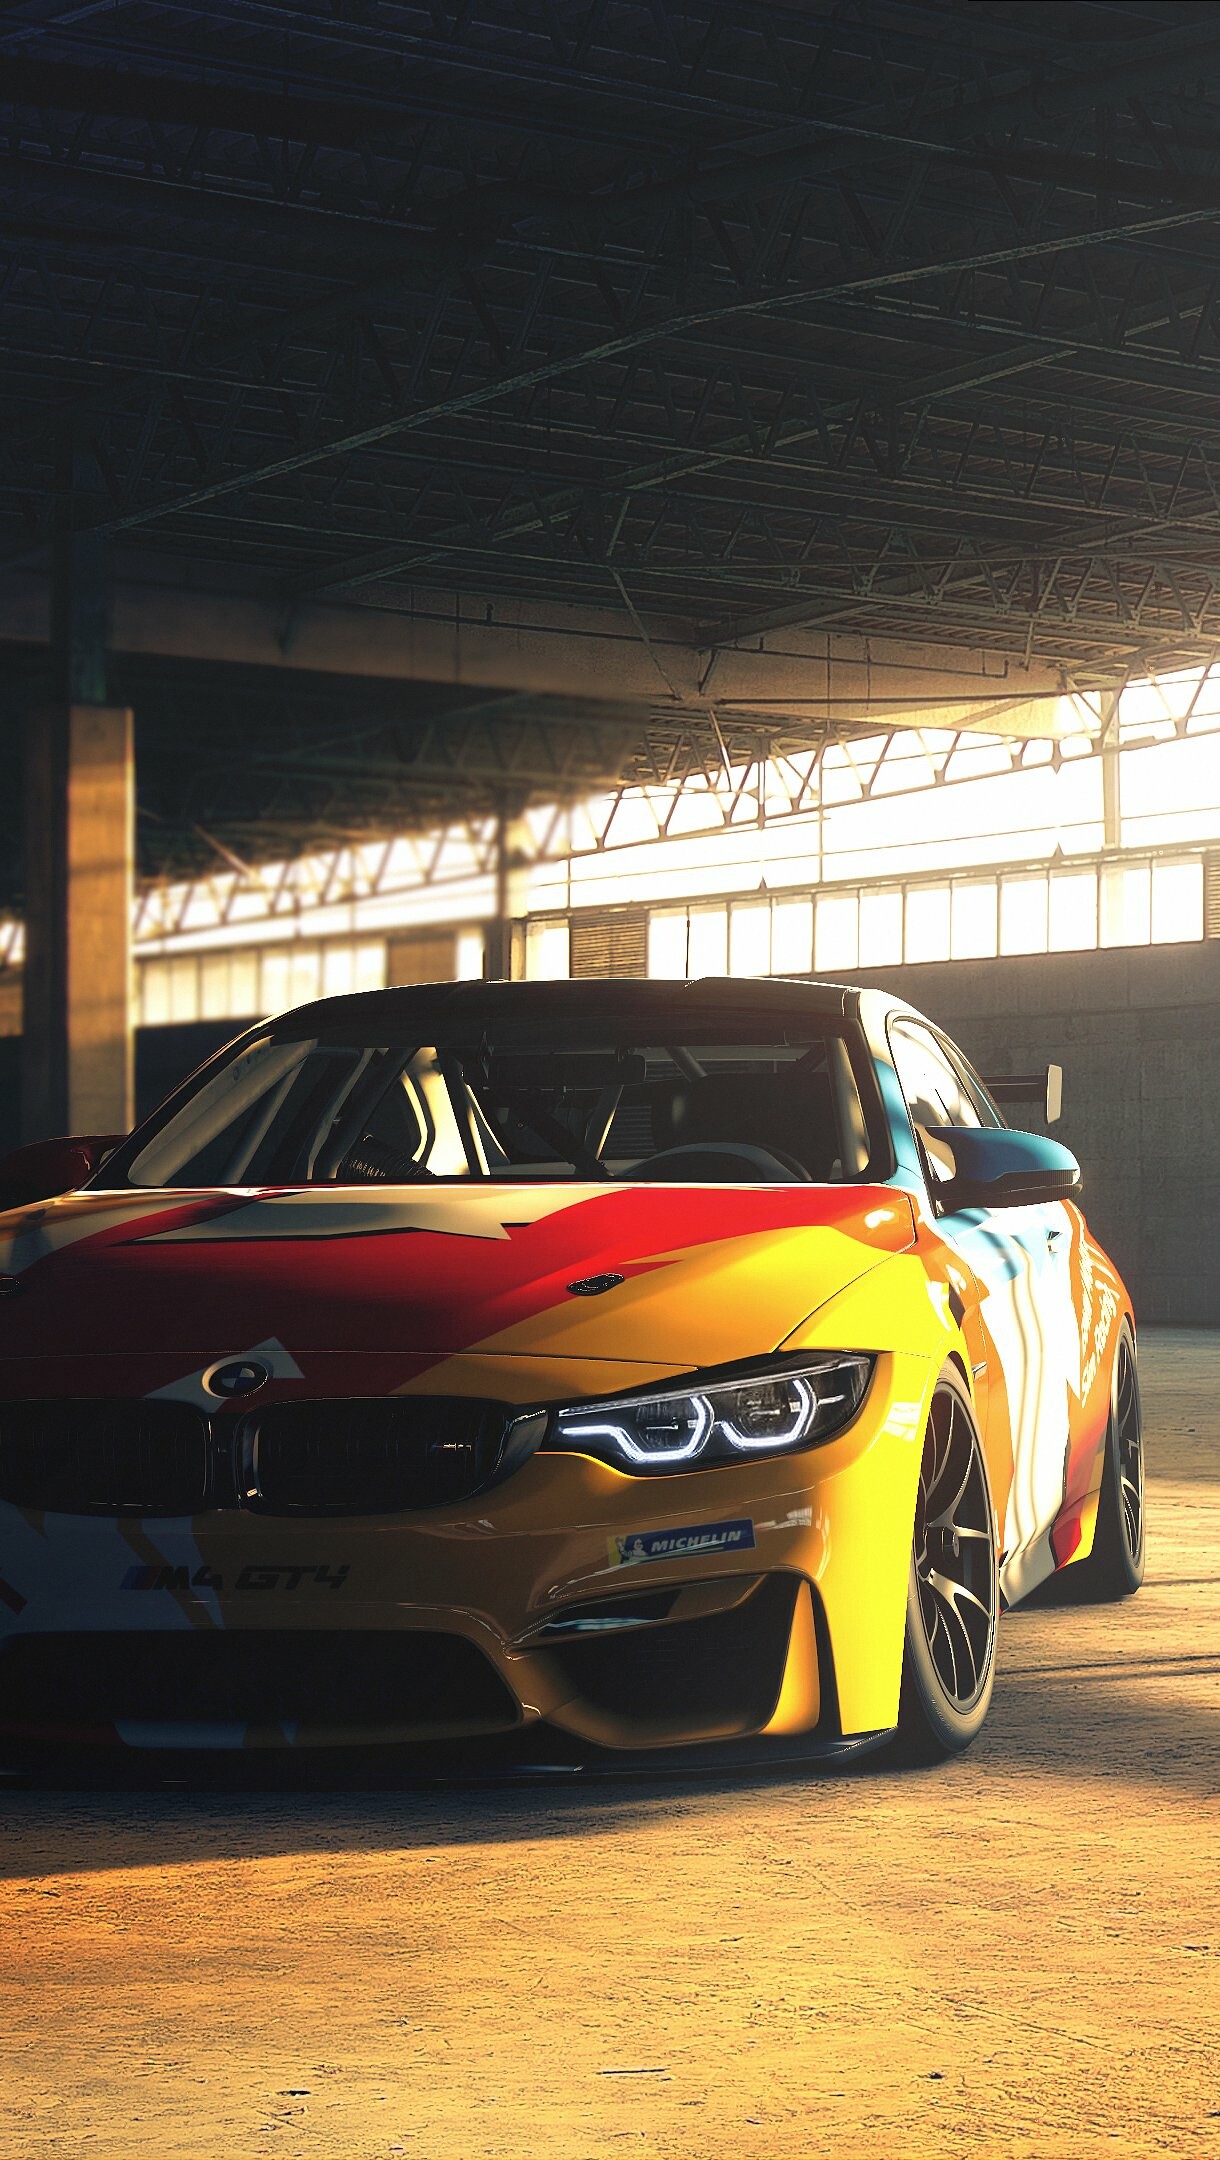 BMW: Company based in Germany and known worldwide for its high quality vehicles, GT4-spec M4 racer. 1220x2160 HD Wallpaper.